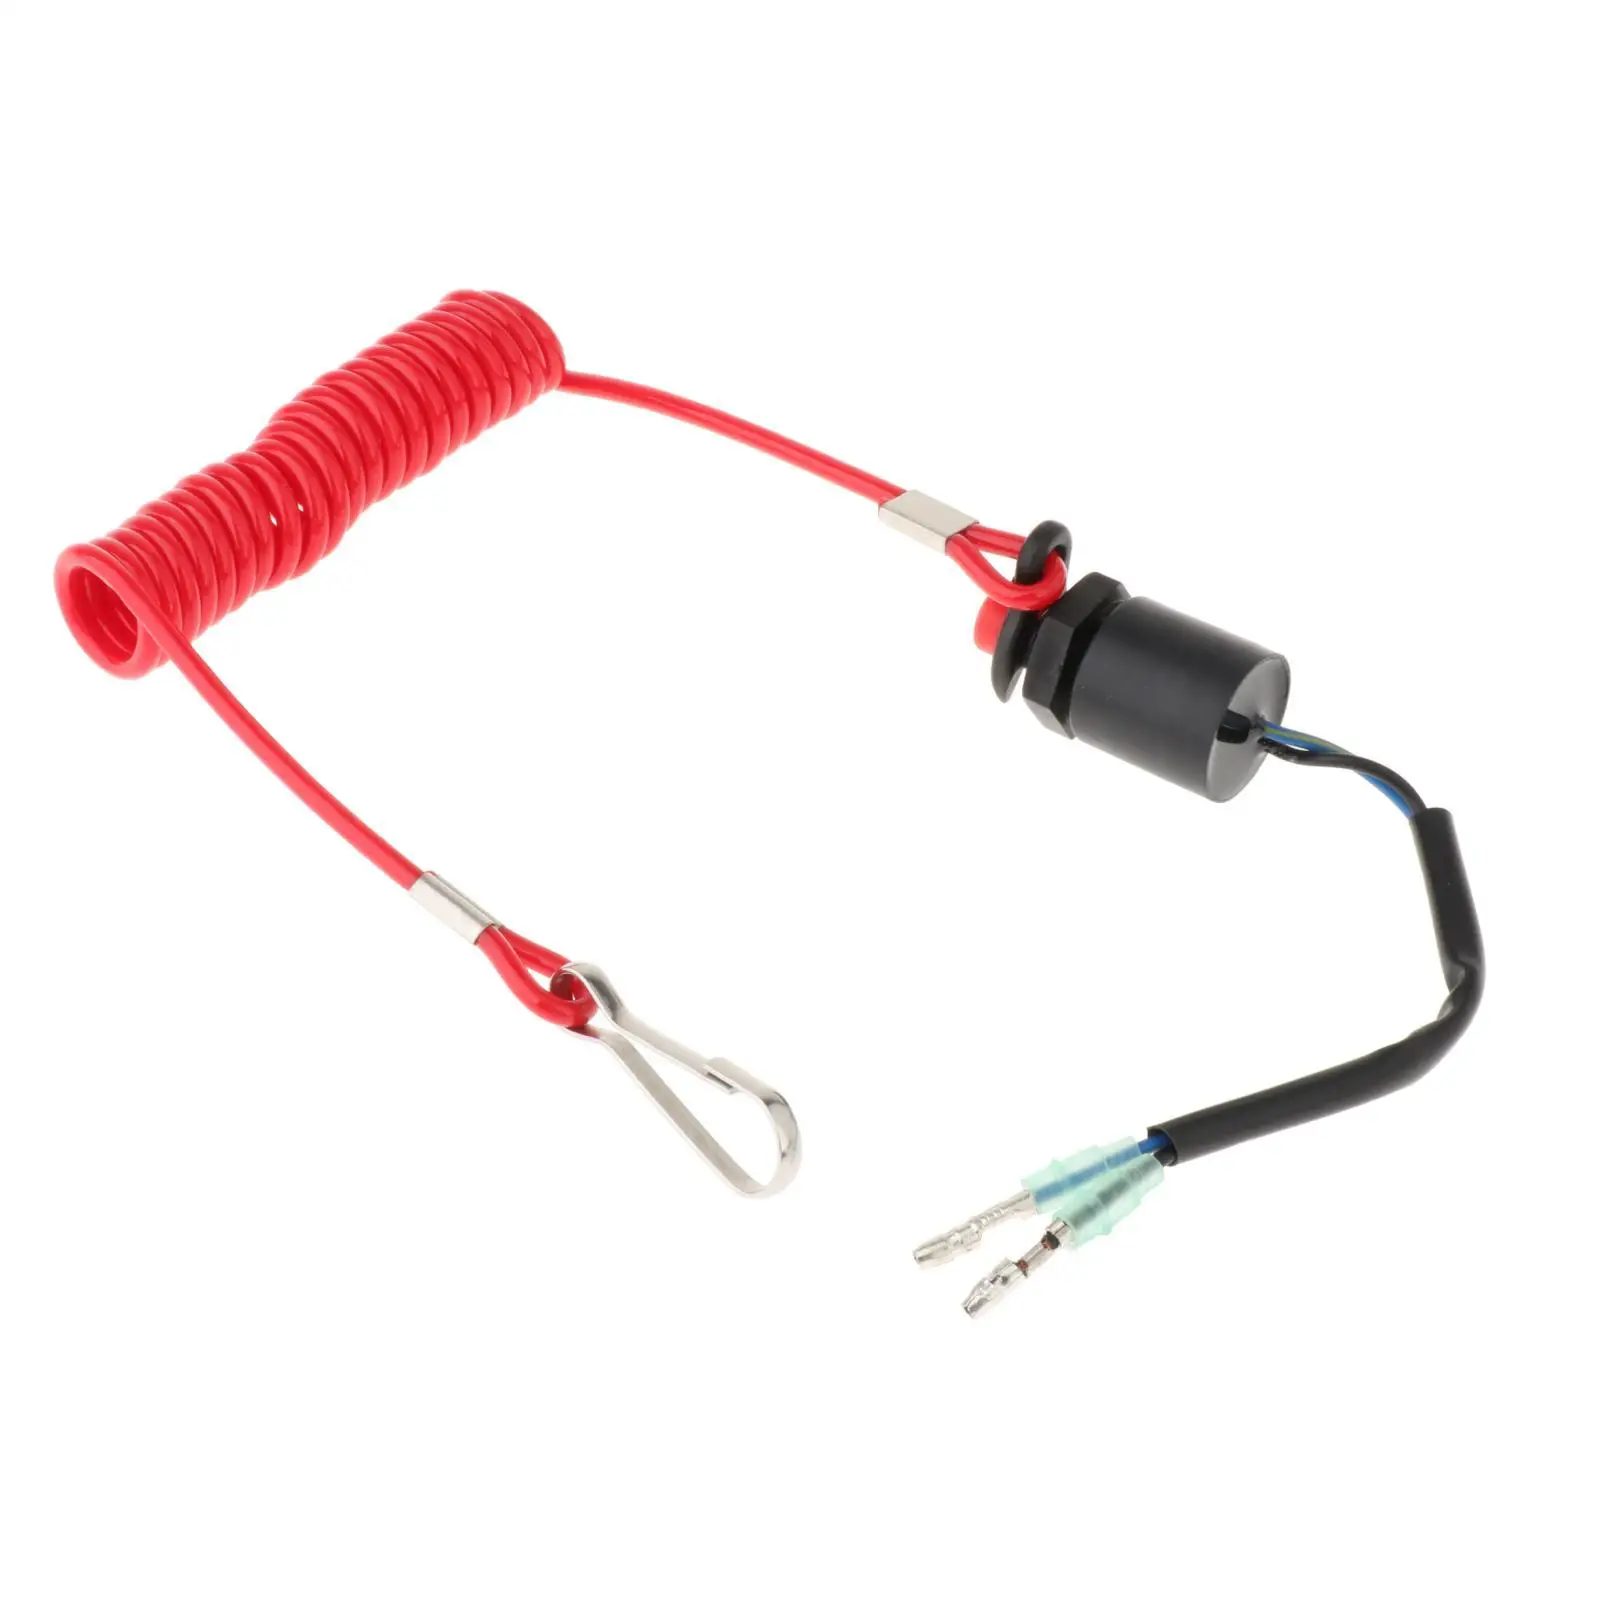 Engine Stop Kill Switch for Suzuki DT DF Outboard Motors 4HP-100HP